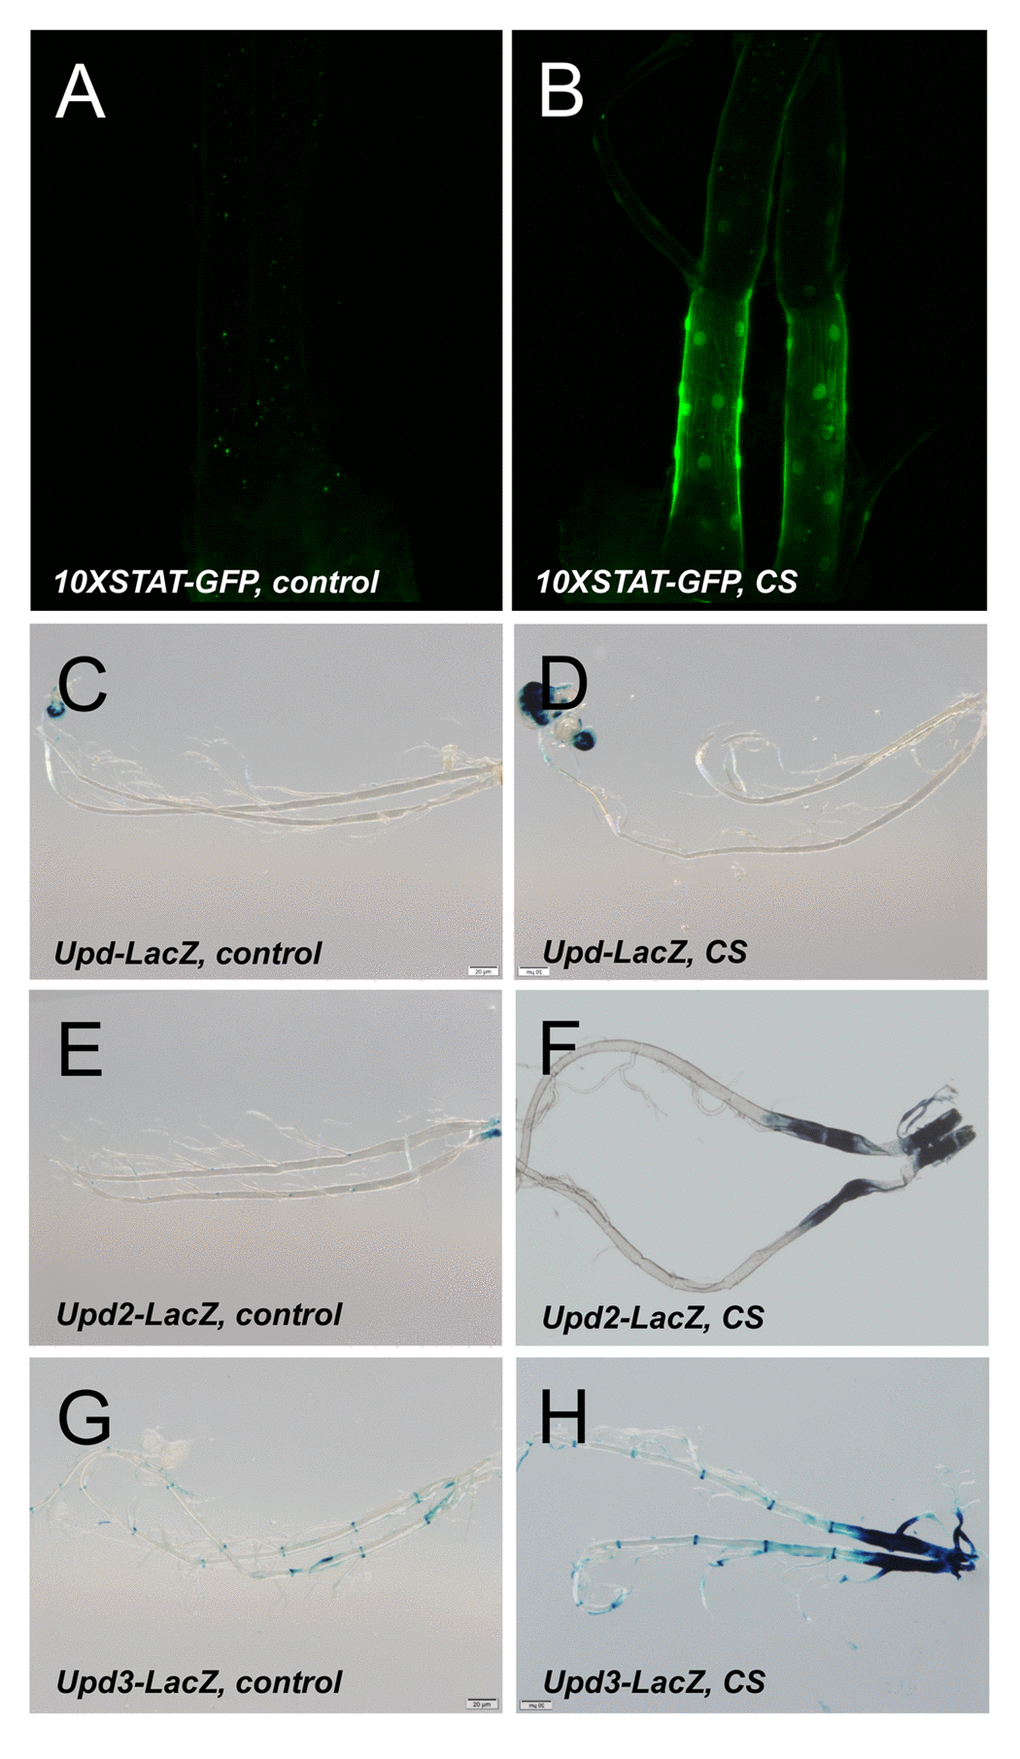 Activation of the JAK/STAT signaling pathway by CS exposure. A STAT reporter line (10XSTAT) tht was left untreated (A) or exposed to CS (B). LacZ staining of larvae carrying upd-Gal4, UAS-GFP (C, D), upd2-Gal4, UAS-GFP (E, F) or upd3-Gal4, UAS-GFP (G, H). Displayed are isoltaed trachea from non treated larvae (C, E, G) or those exposed to CS (D, F, H).